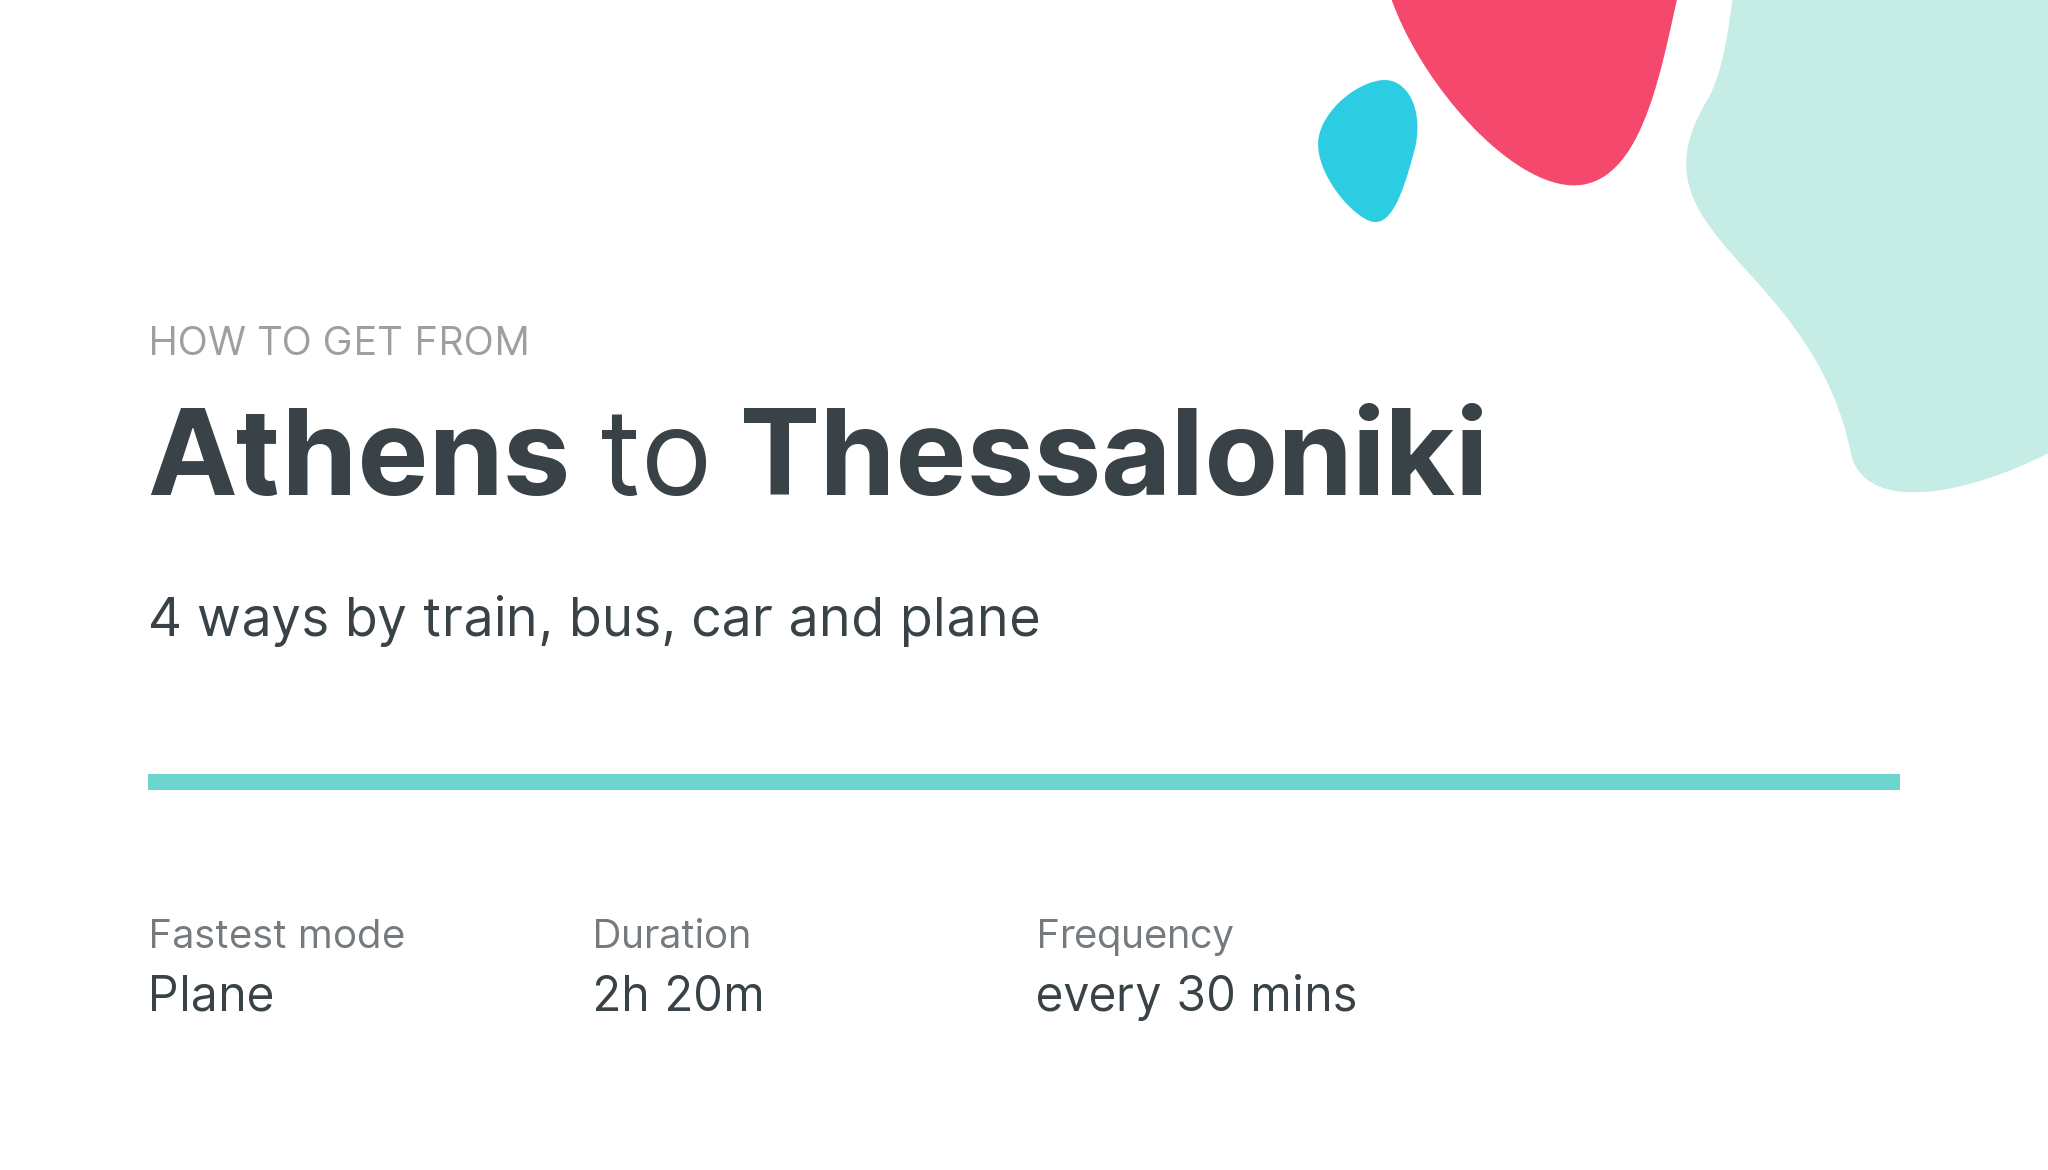 How do I get from Athens to Thessaloniki